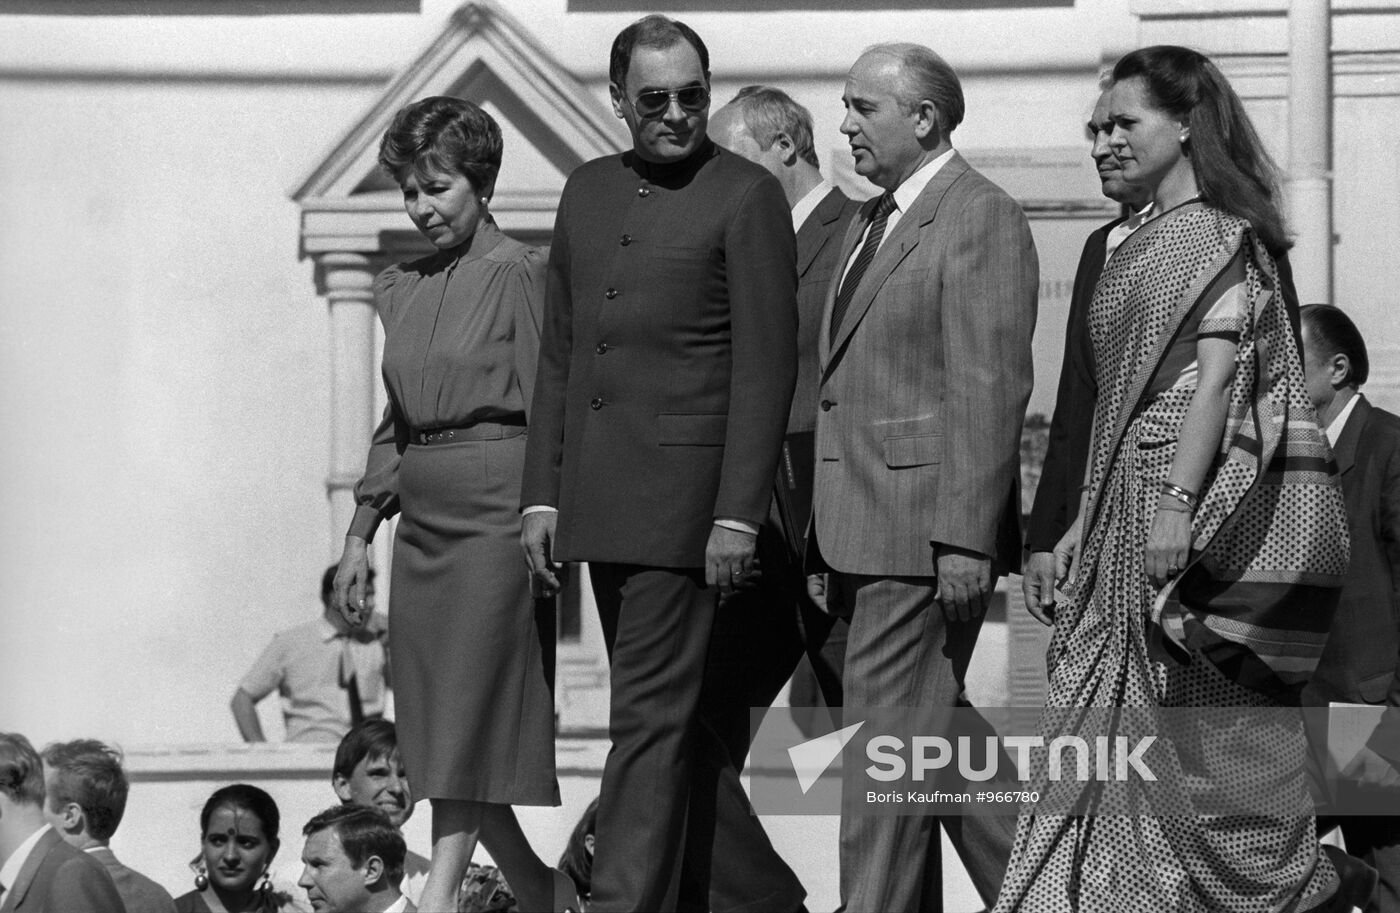 Mikhail Gorbachev and Rajiv Gandhi with wives